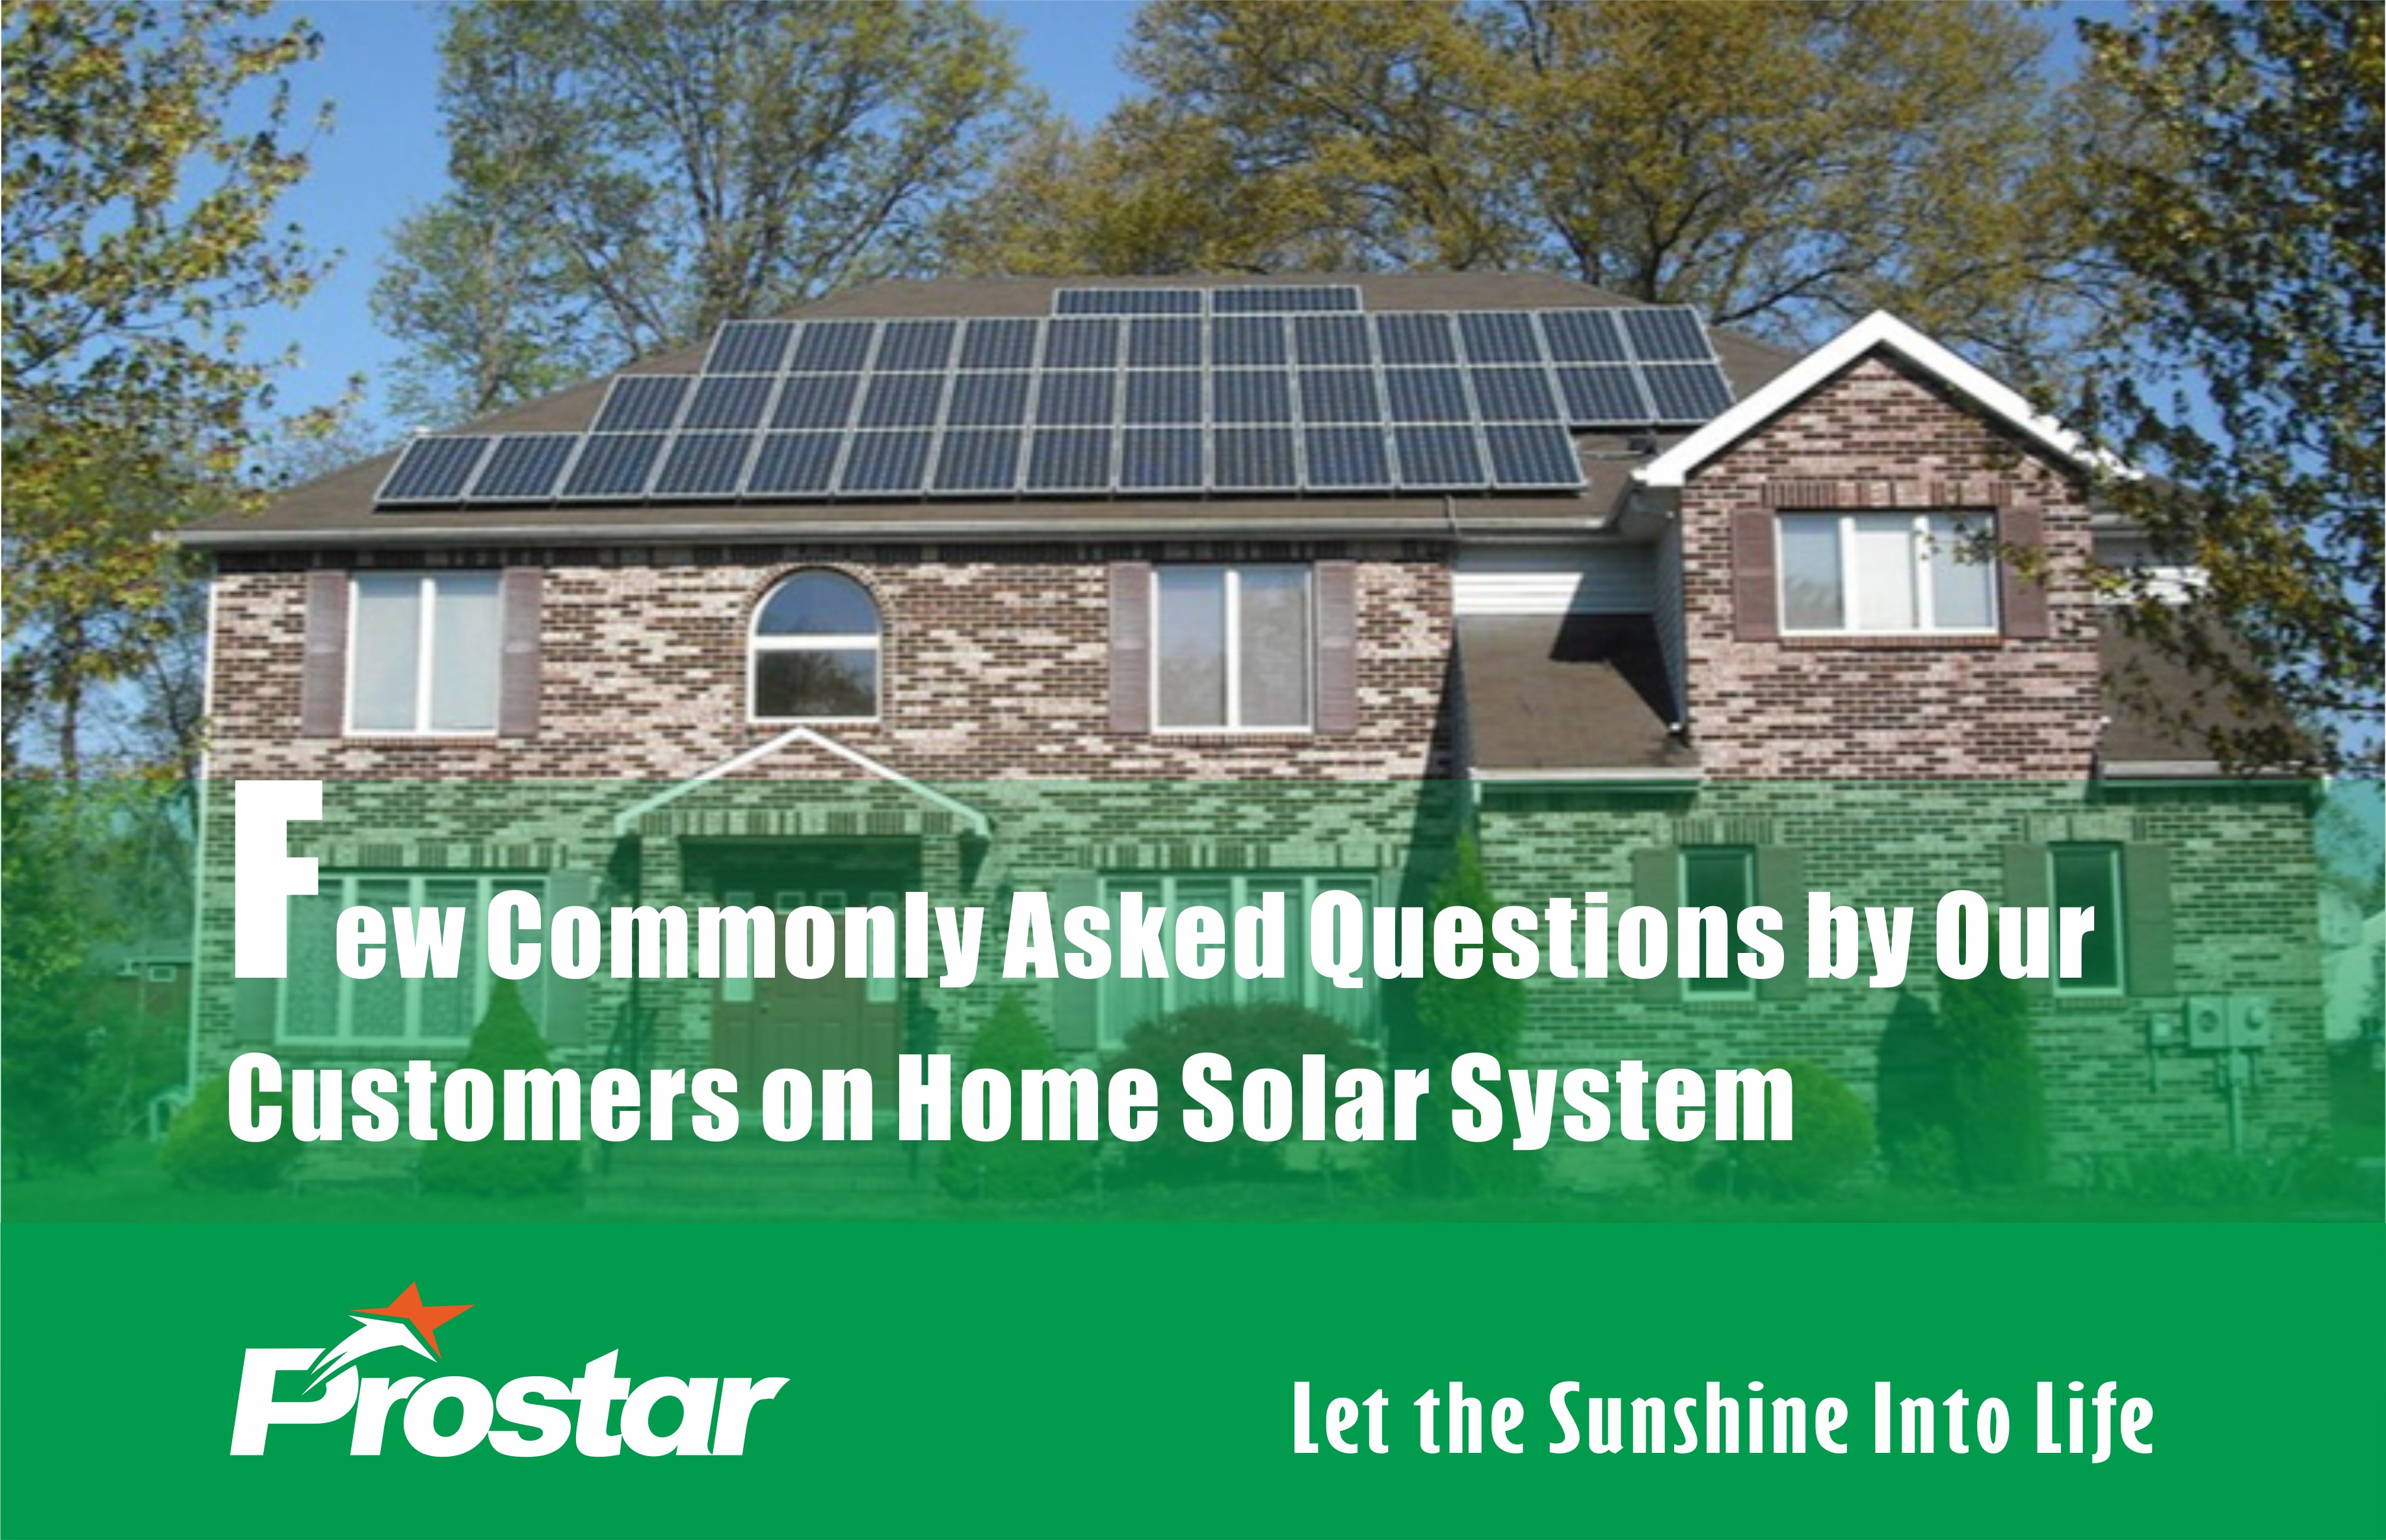 Few Commonly Asked Questions by Our Customers on Home Solar System